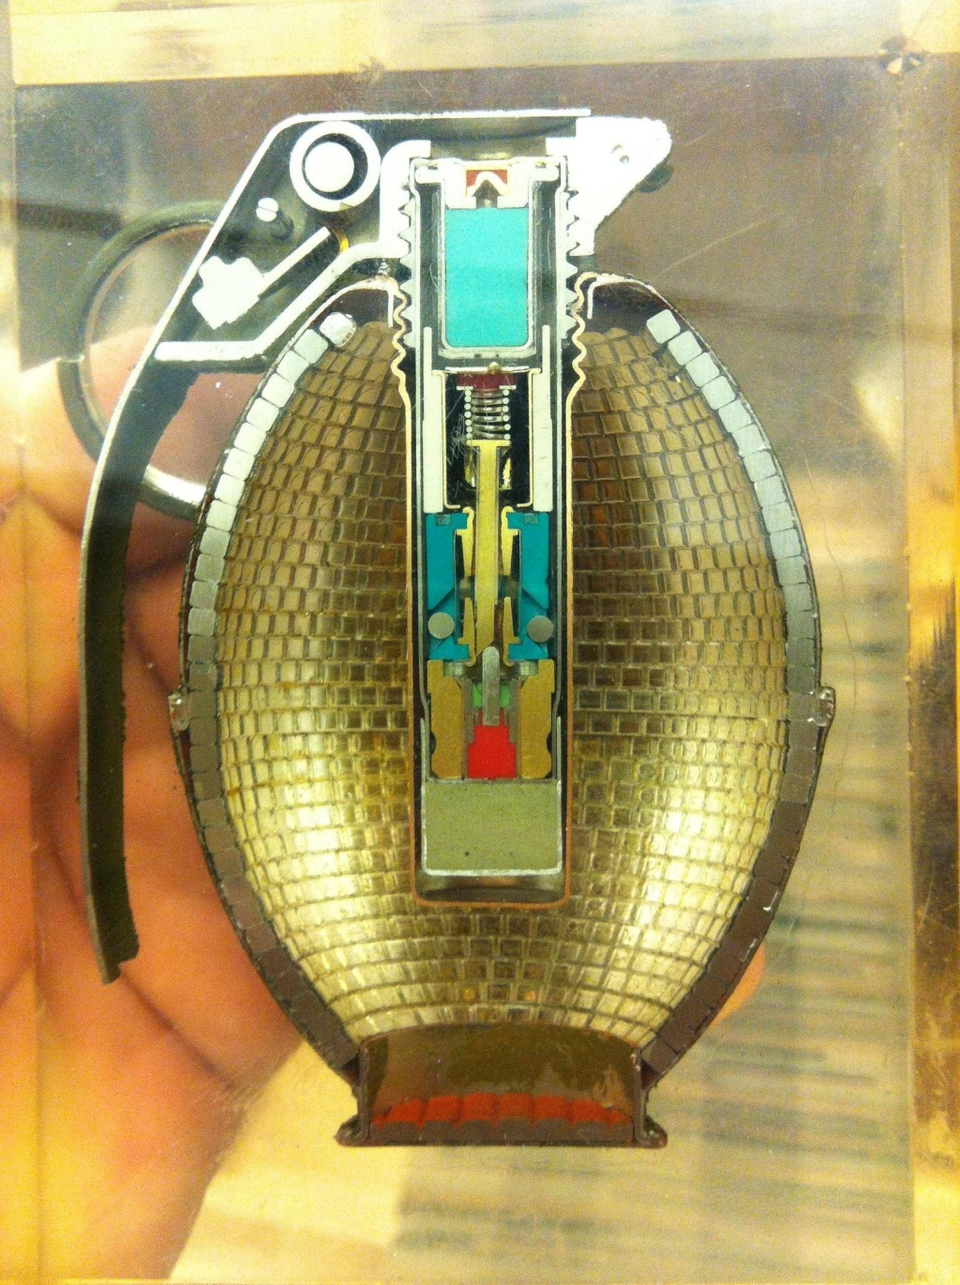 This is what the inside of a grenade looks like.